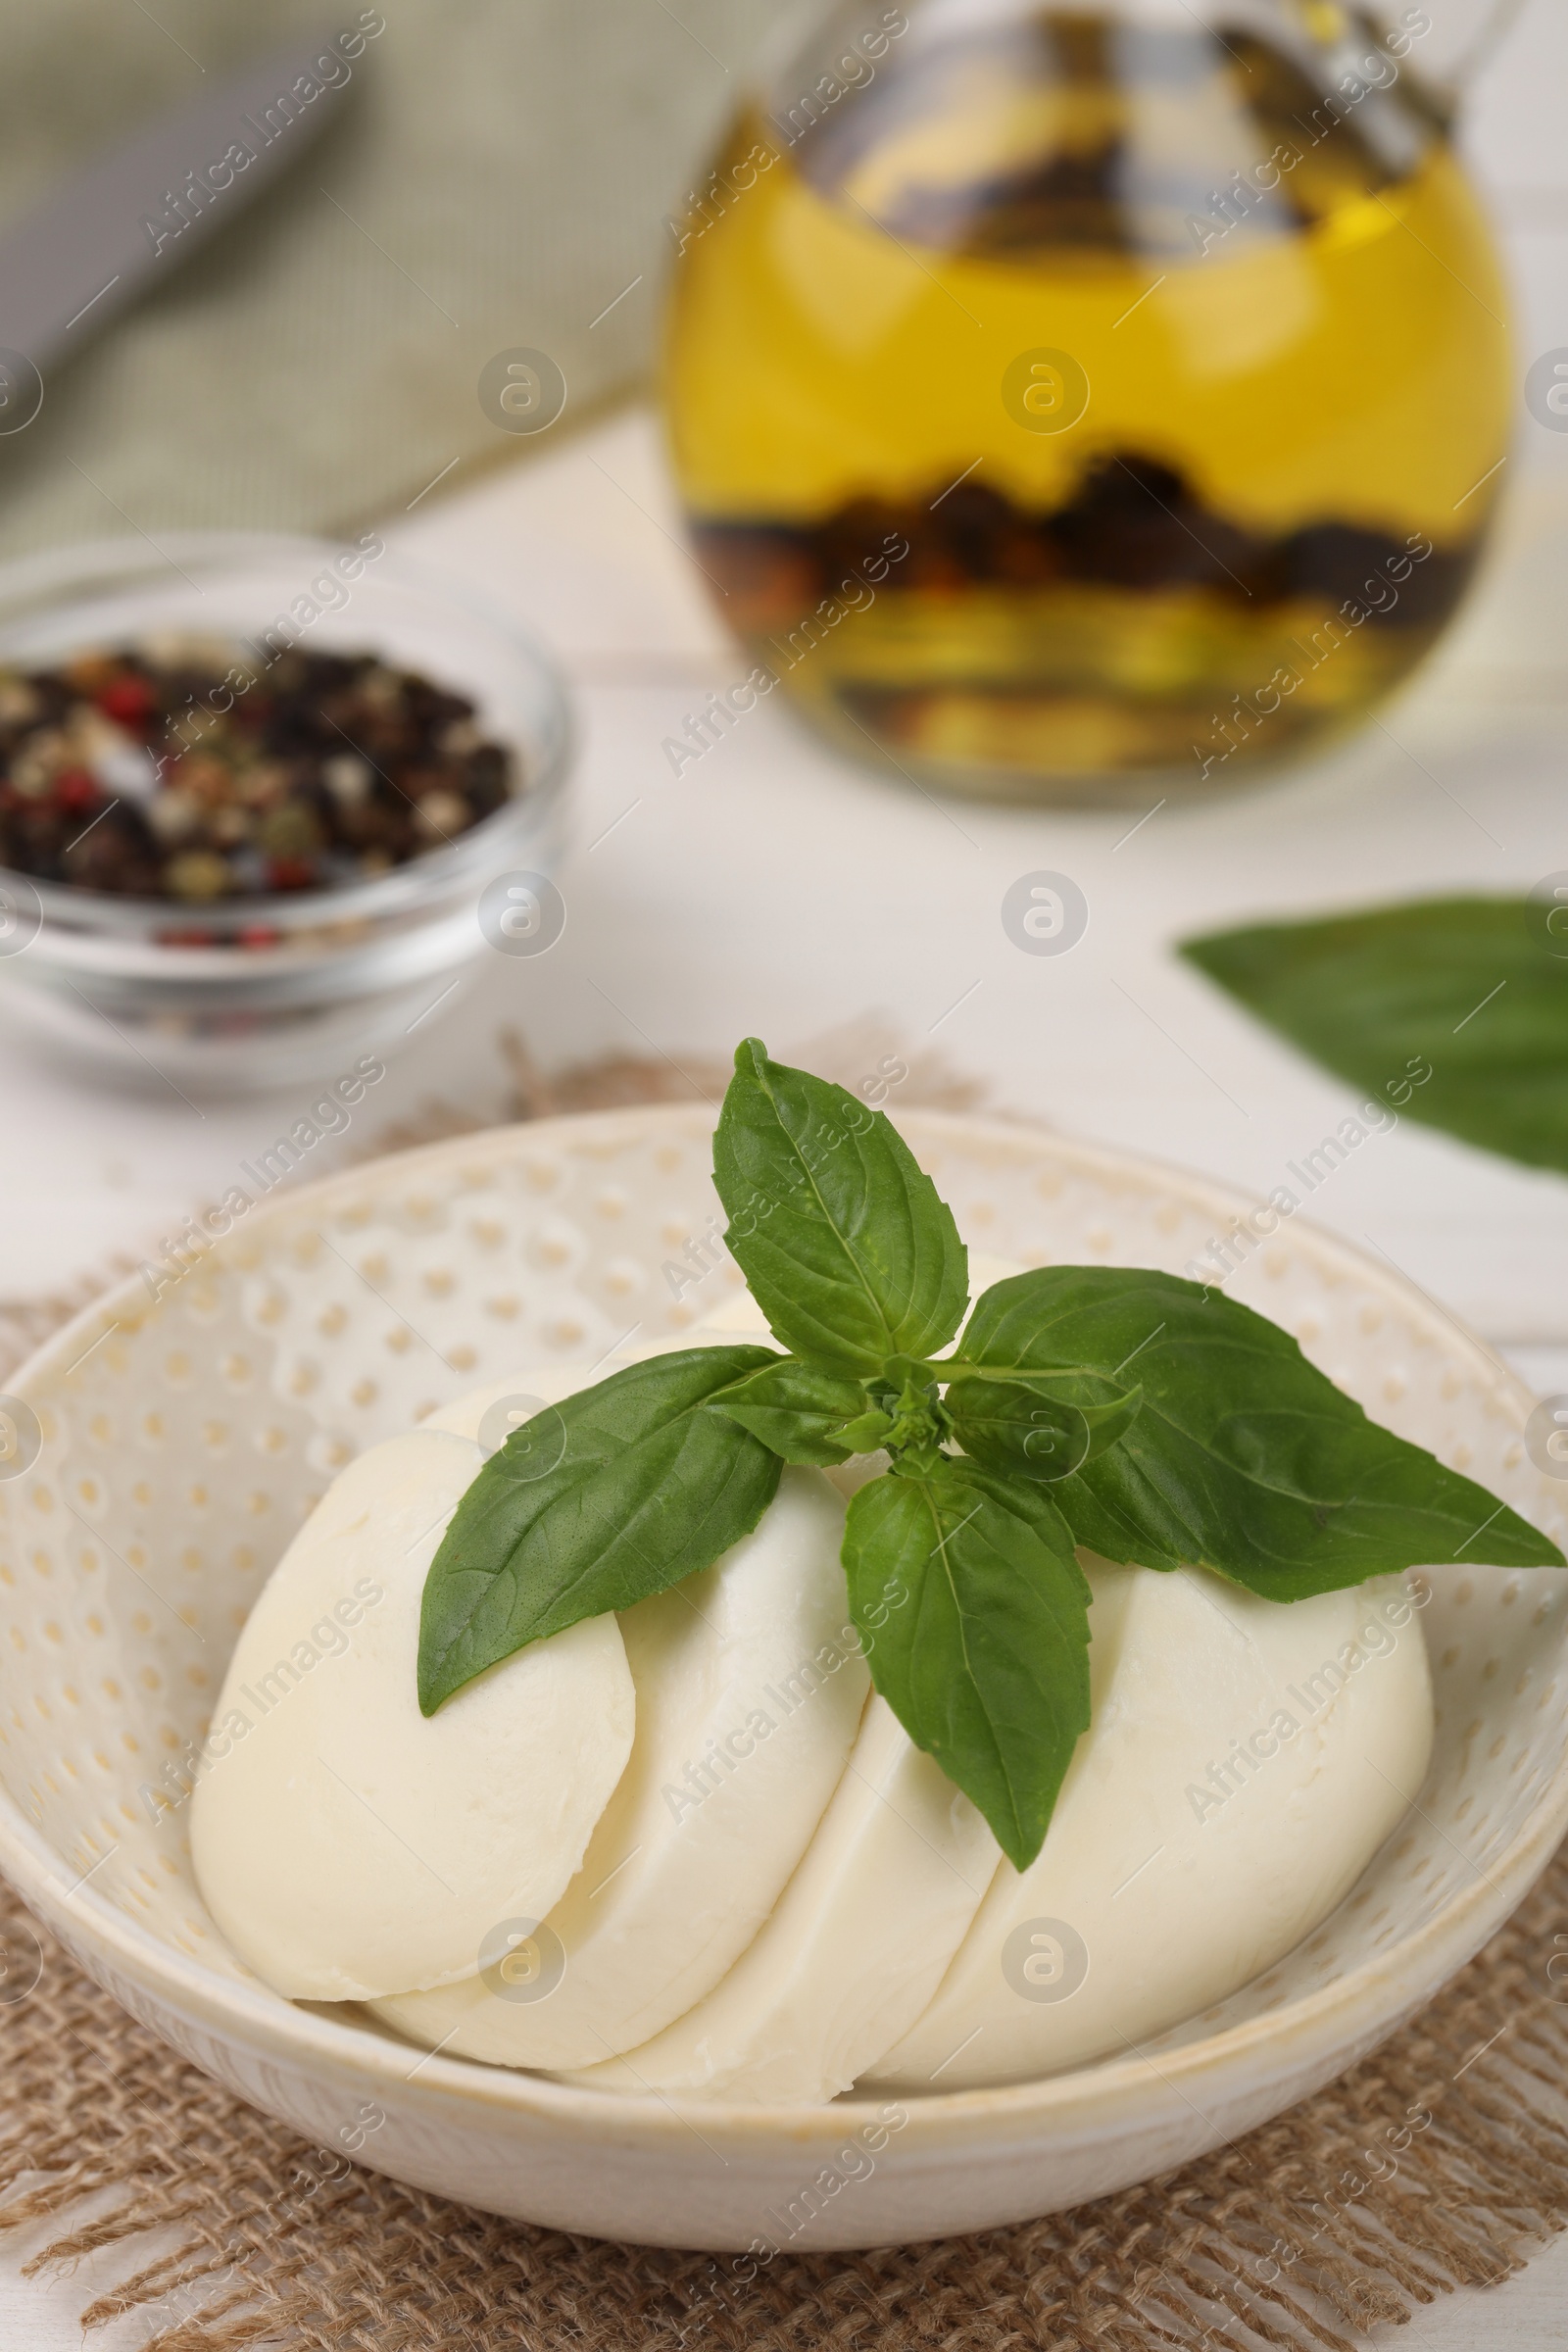 Photo of Tasty mozzarella slices and basil leaves in bowl on table